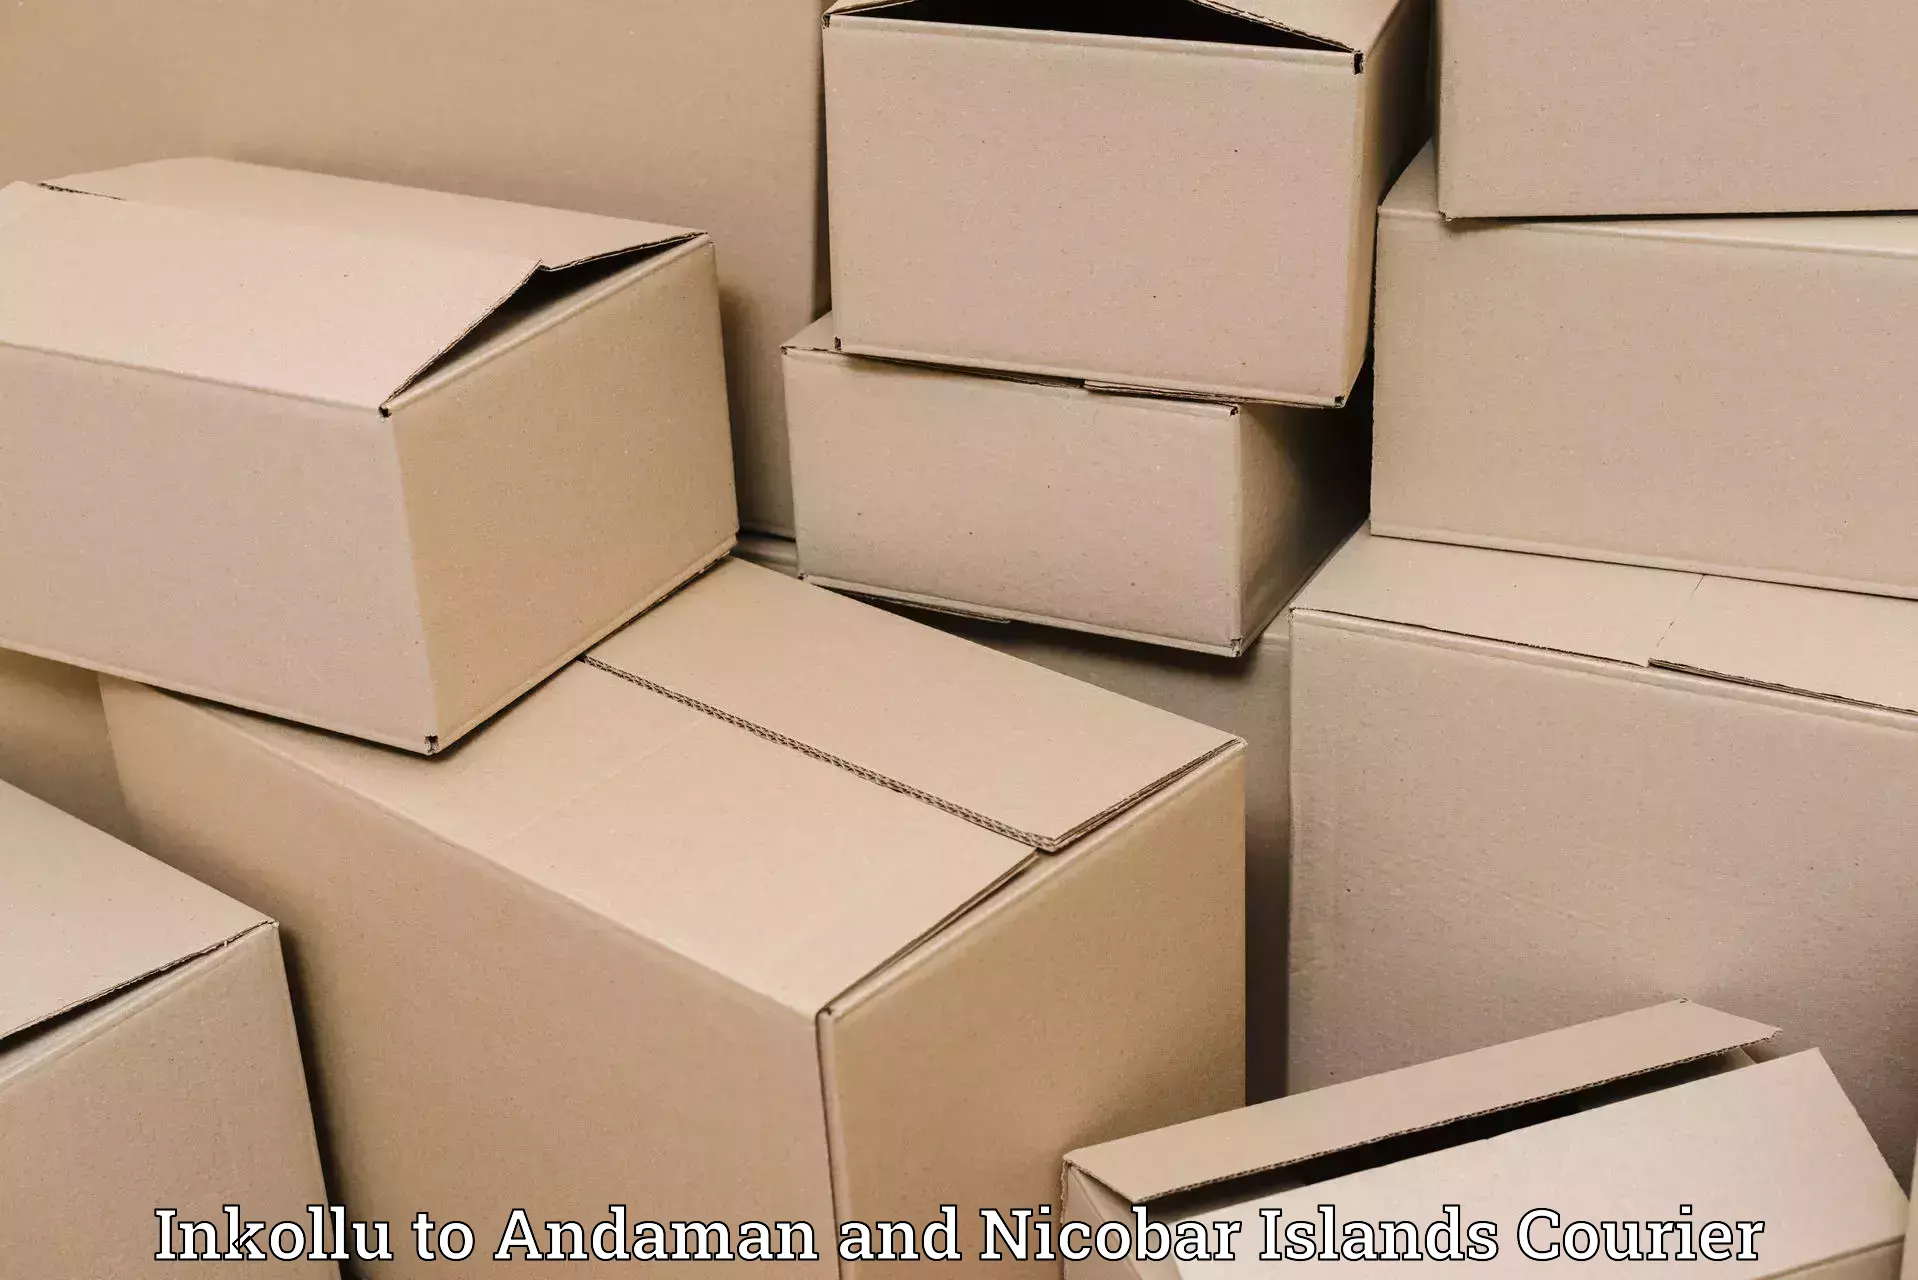 Professional courier handling Inkollu to Andaman and Nicobar Islands